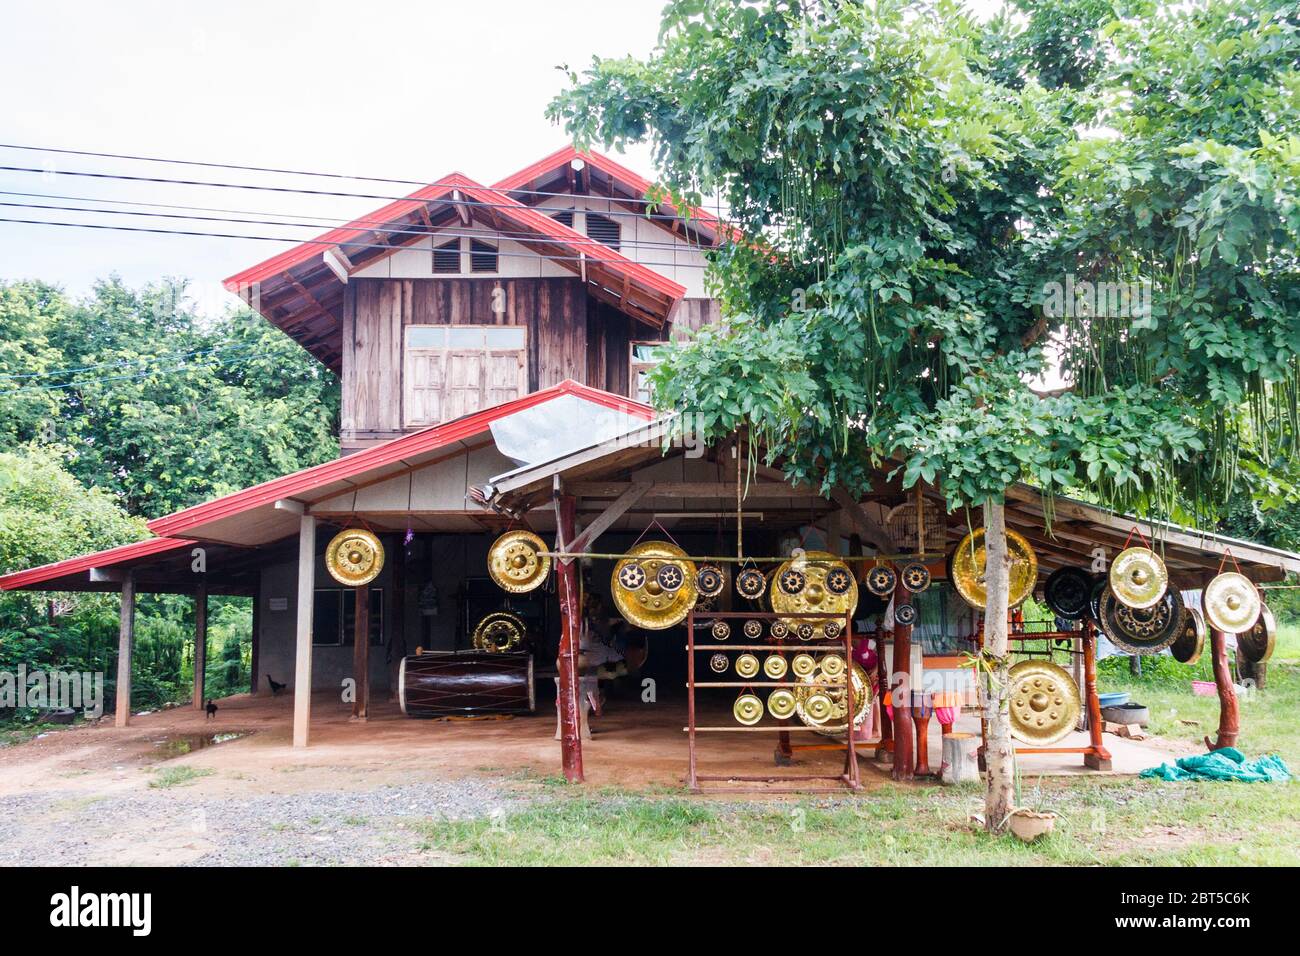 Gongs hanging outside a workshop and shop in Ubon Ratchathani, Thailand Stock Photo